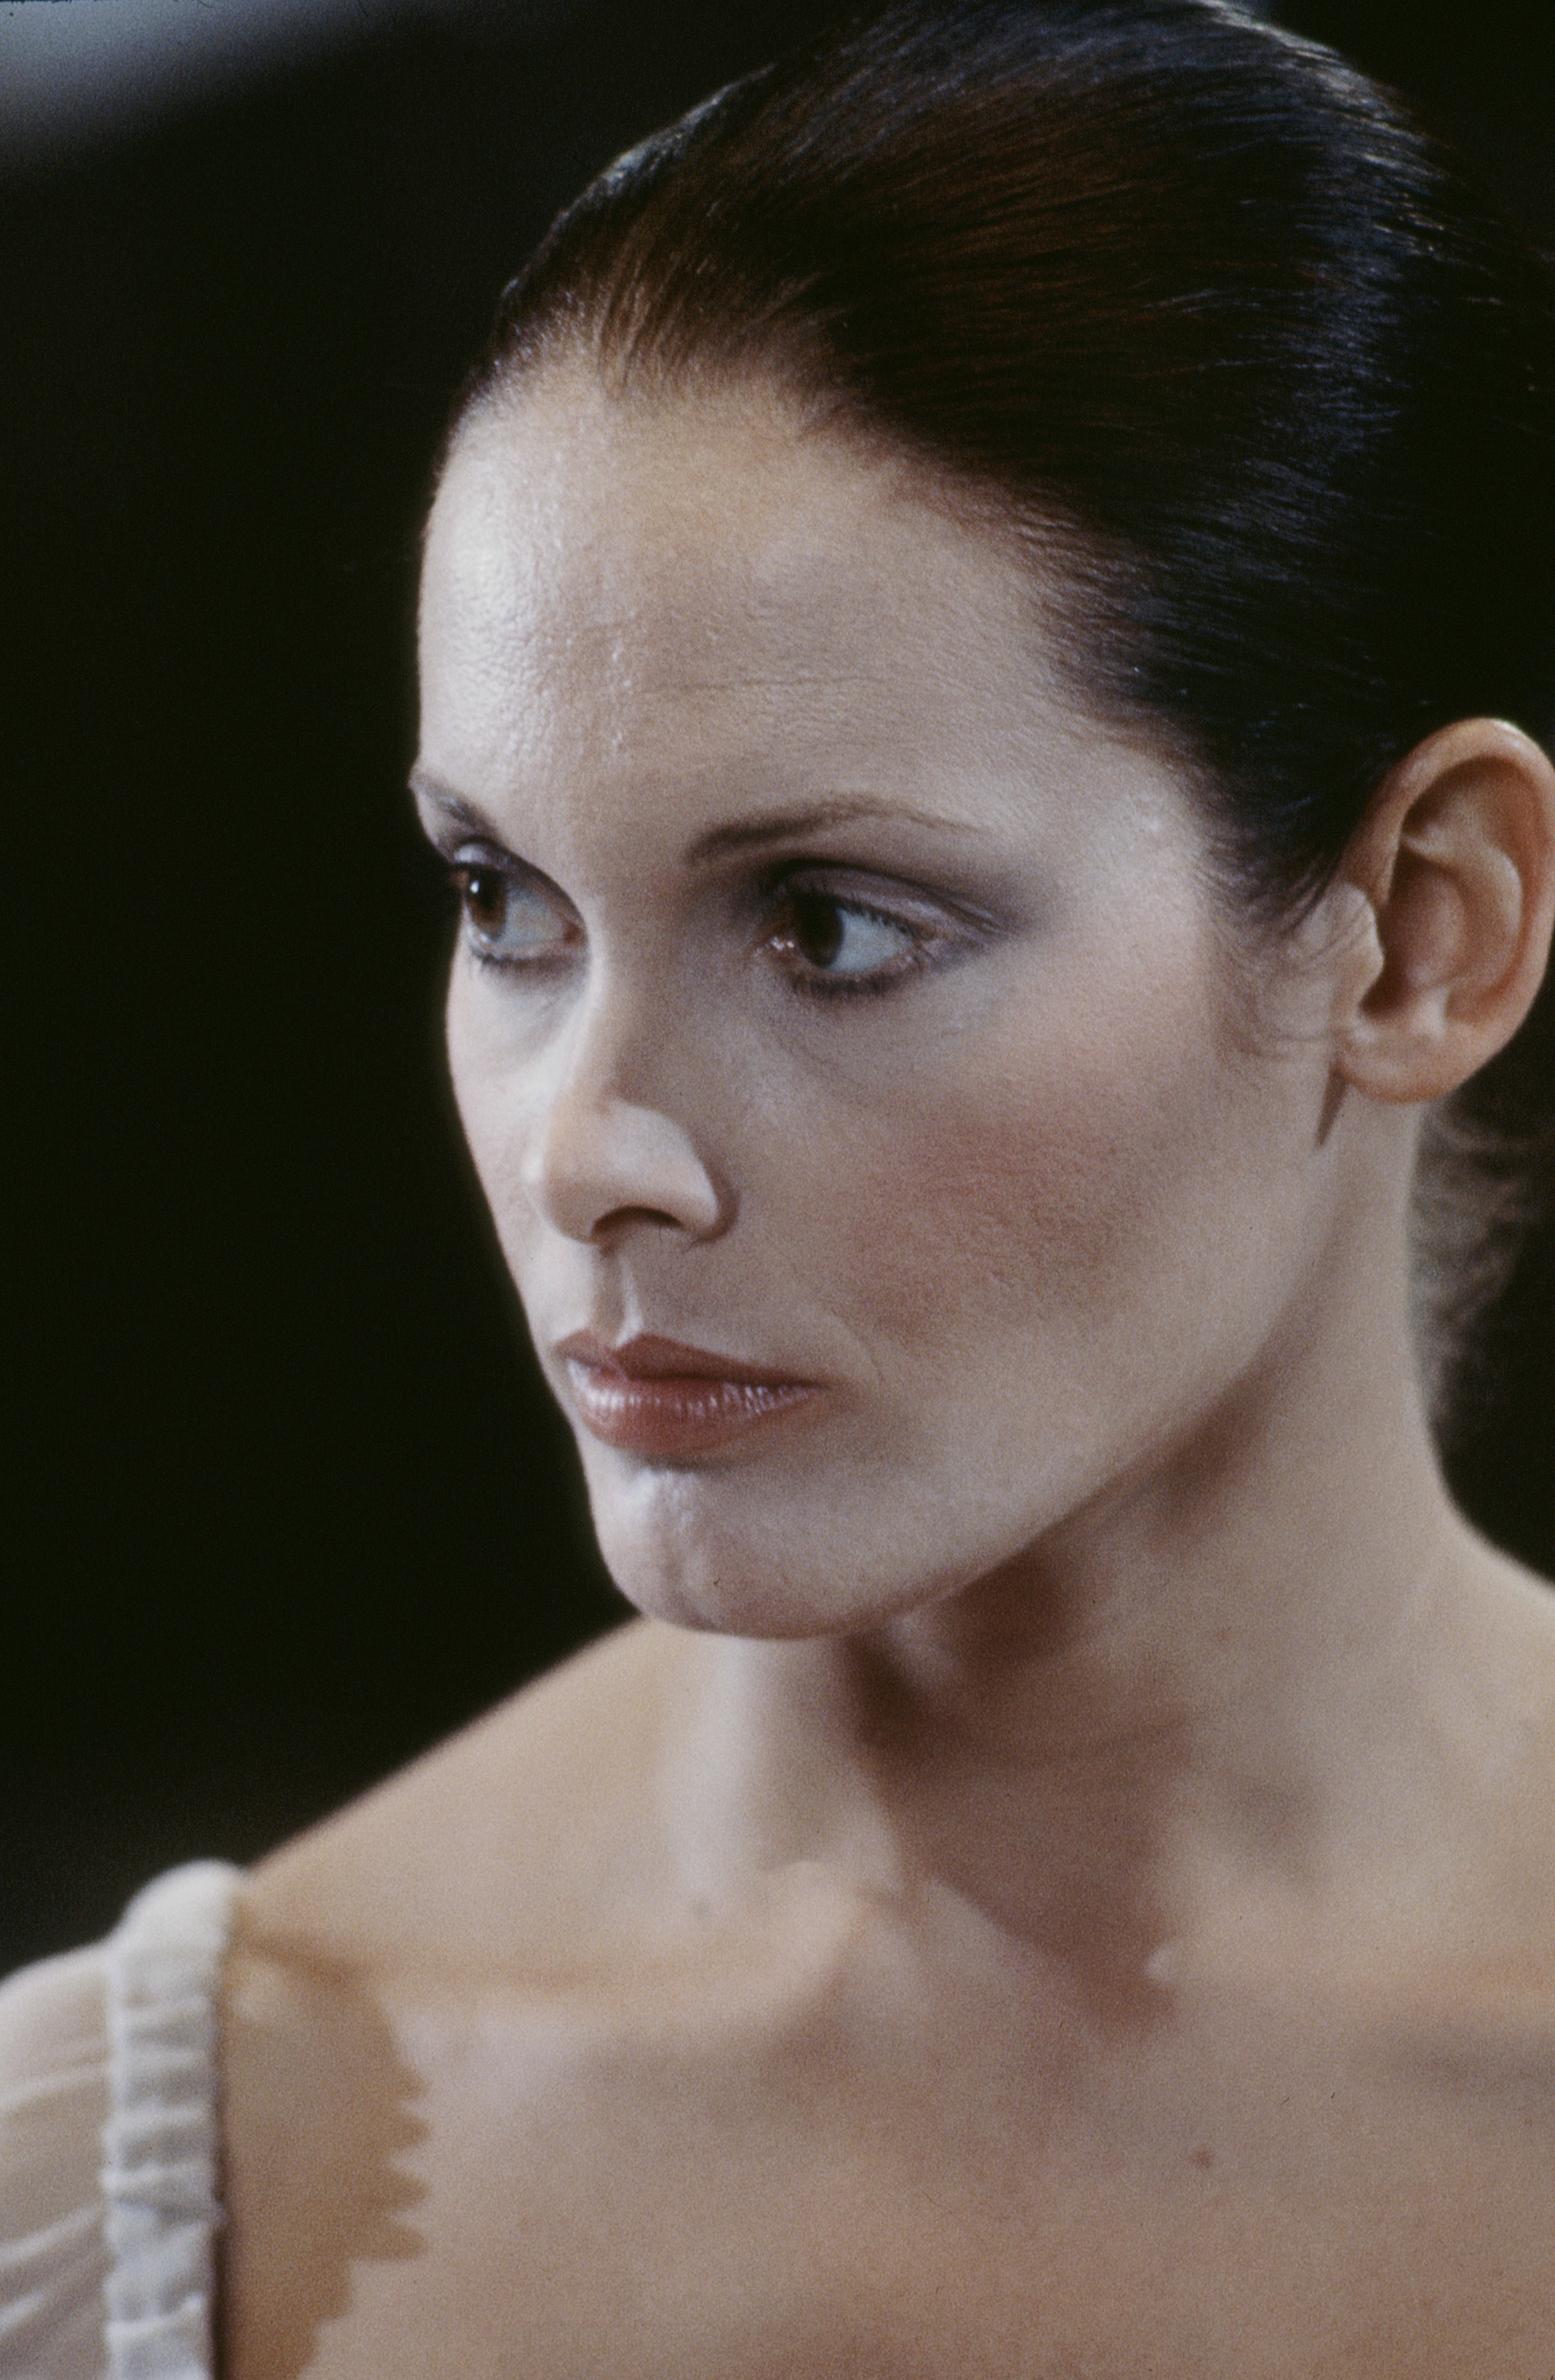 Martine Beswick appearing in the ABC tv movie "Strange New World" in 1975. | Source: Getty Images